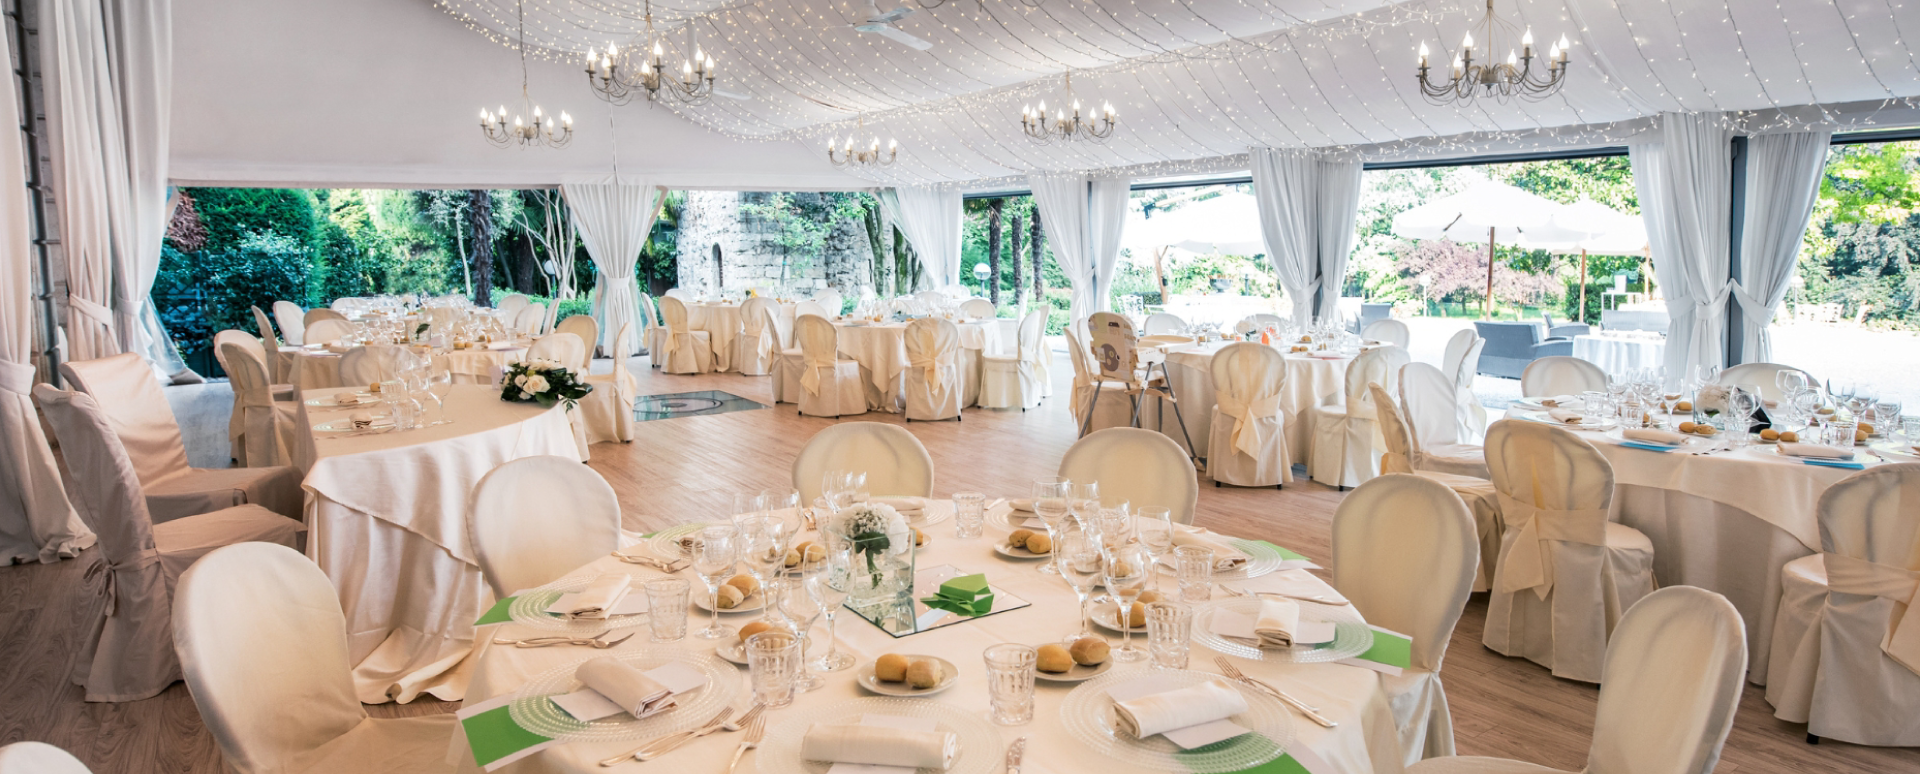 Wedding venue under a large white tent with chandeliers, round tables, white table cloths, and crystal glassware.